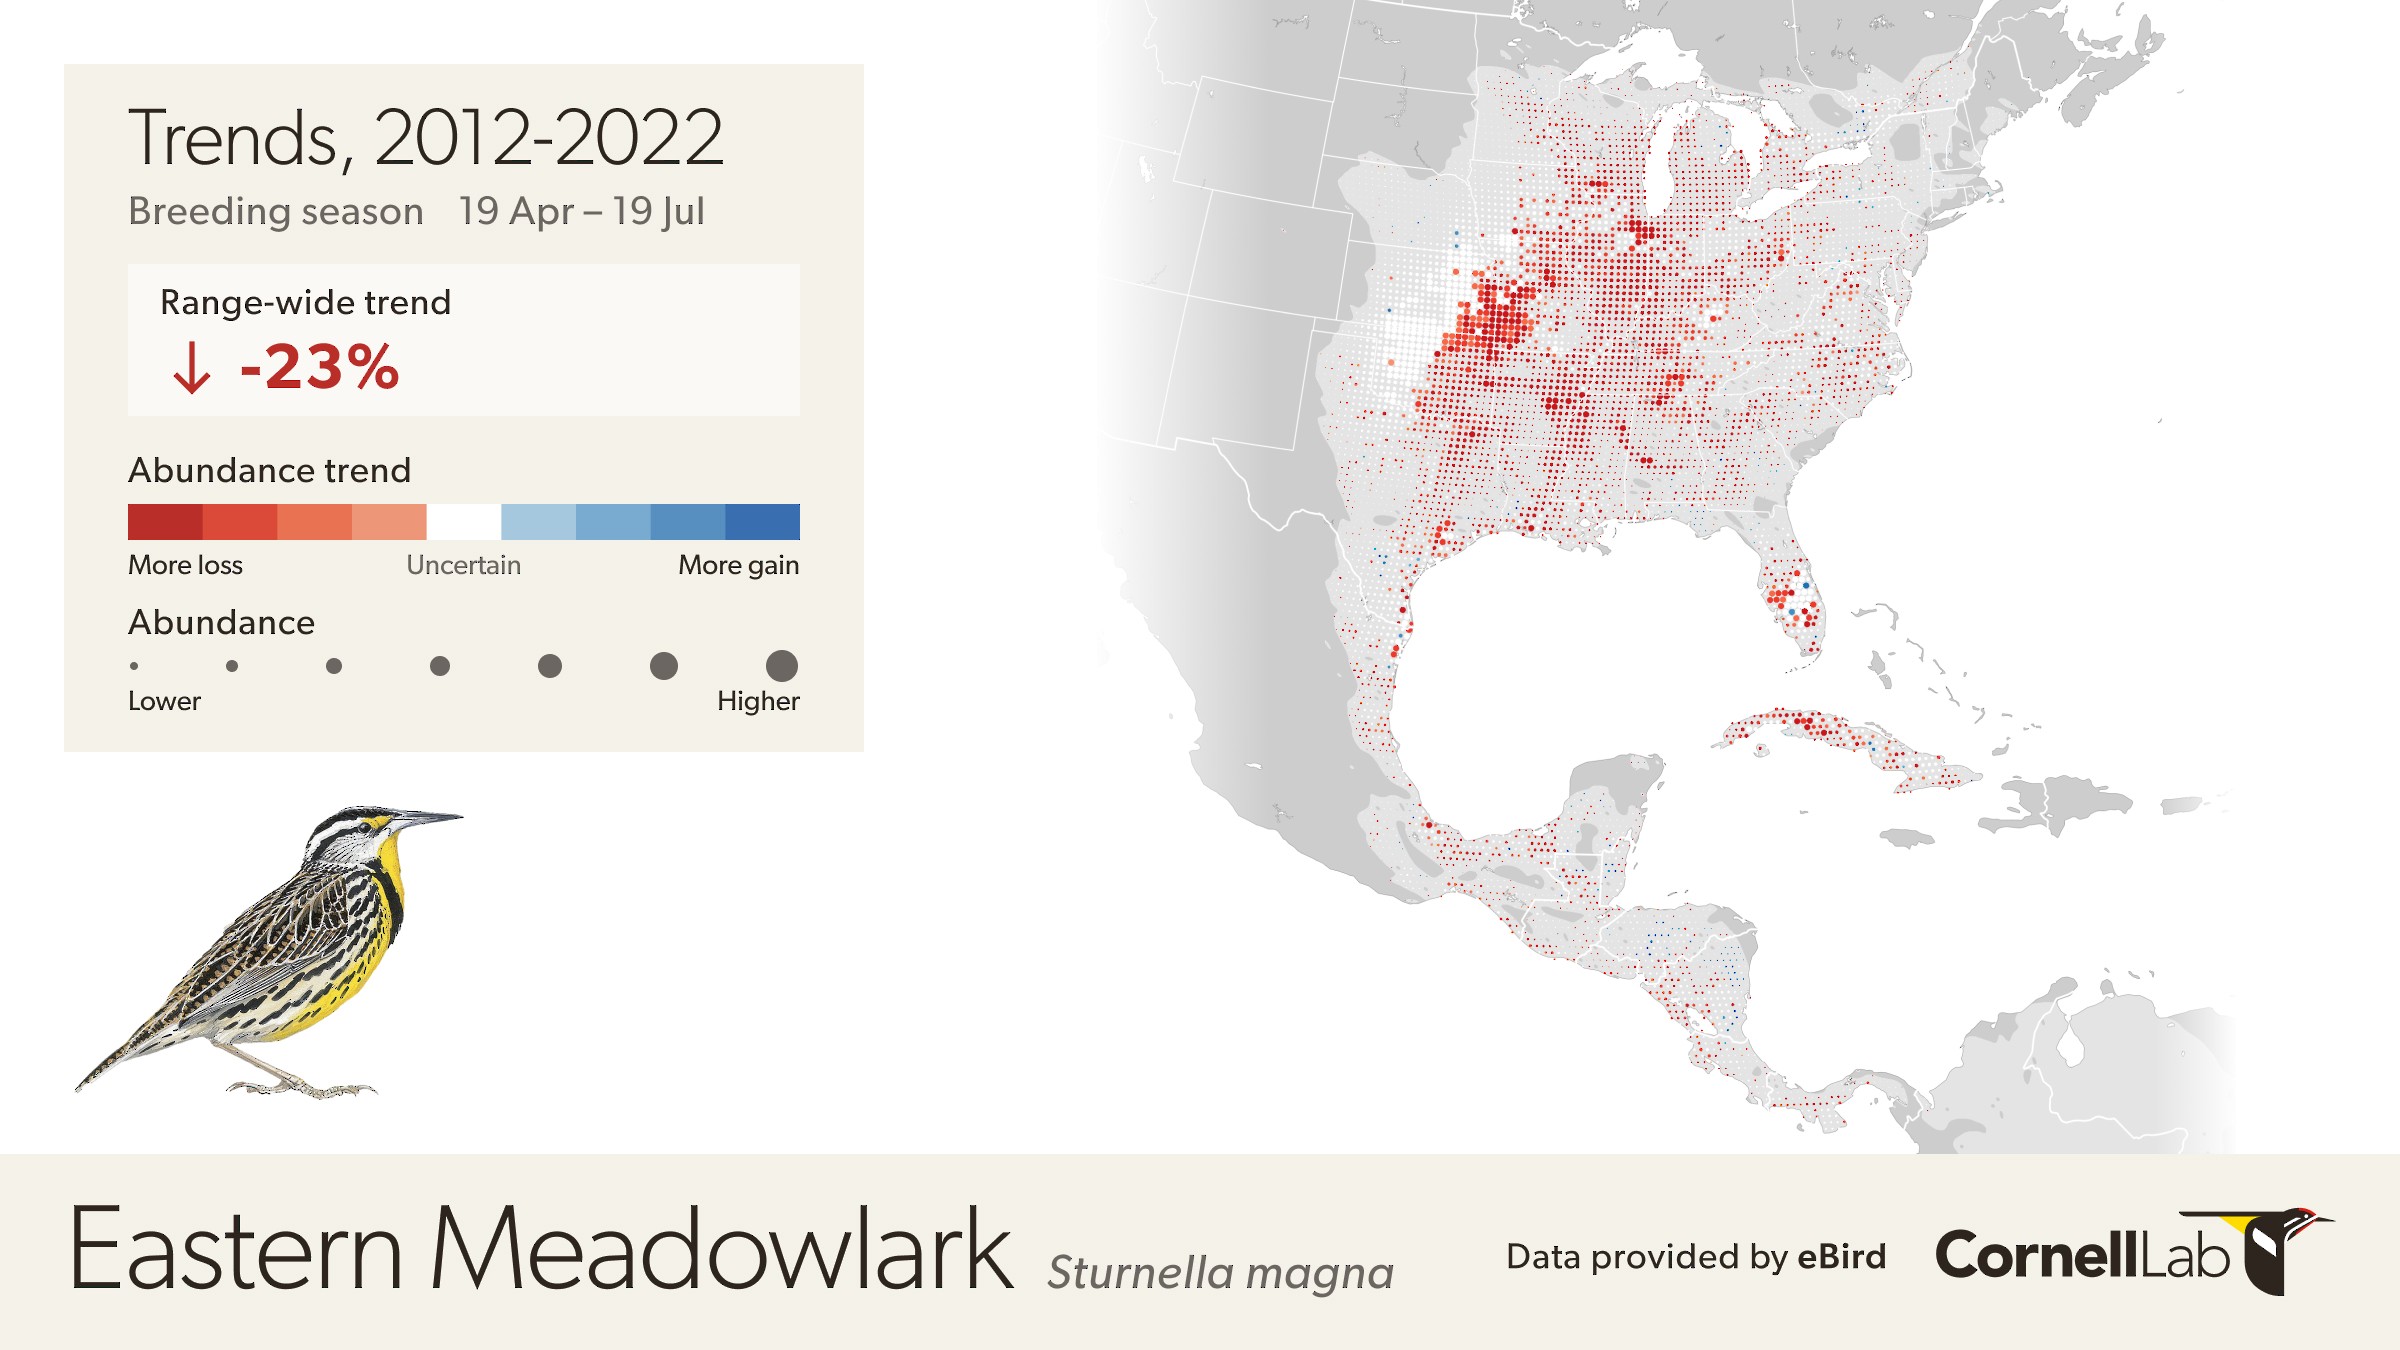 Map of Eastern Meadowlark depicting decline trends throughout its range with red dots.